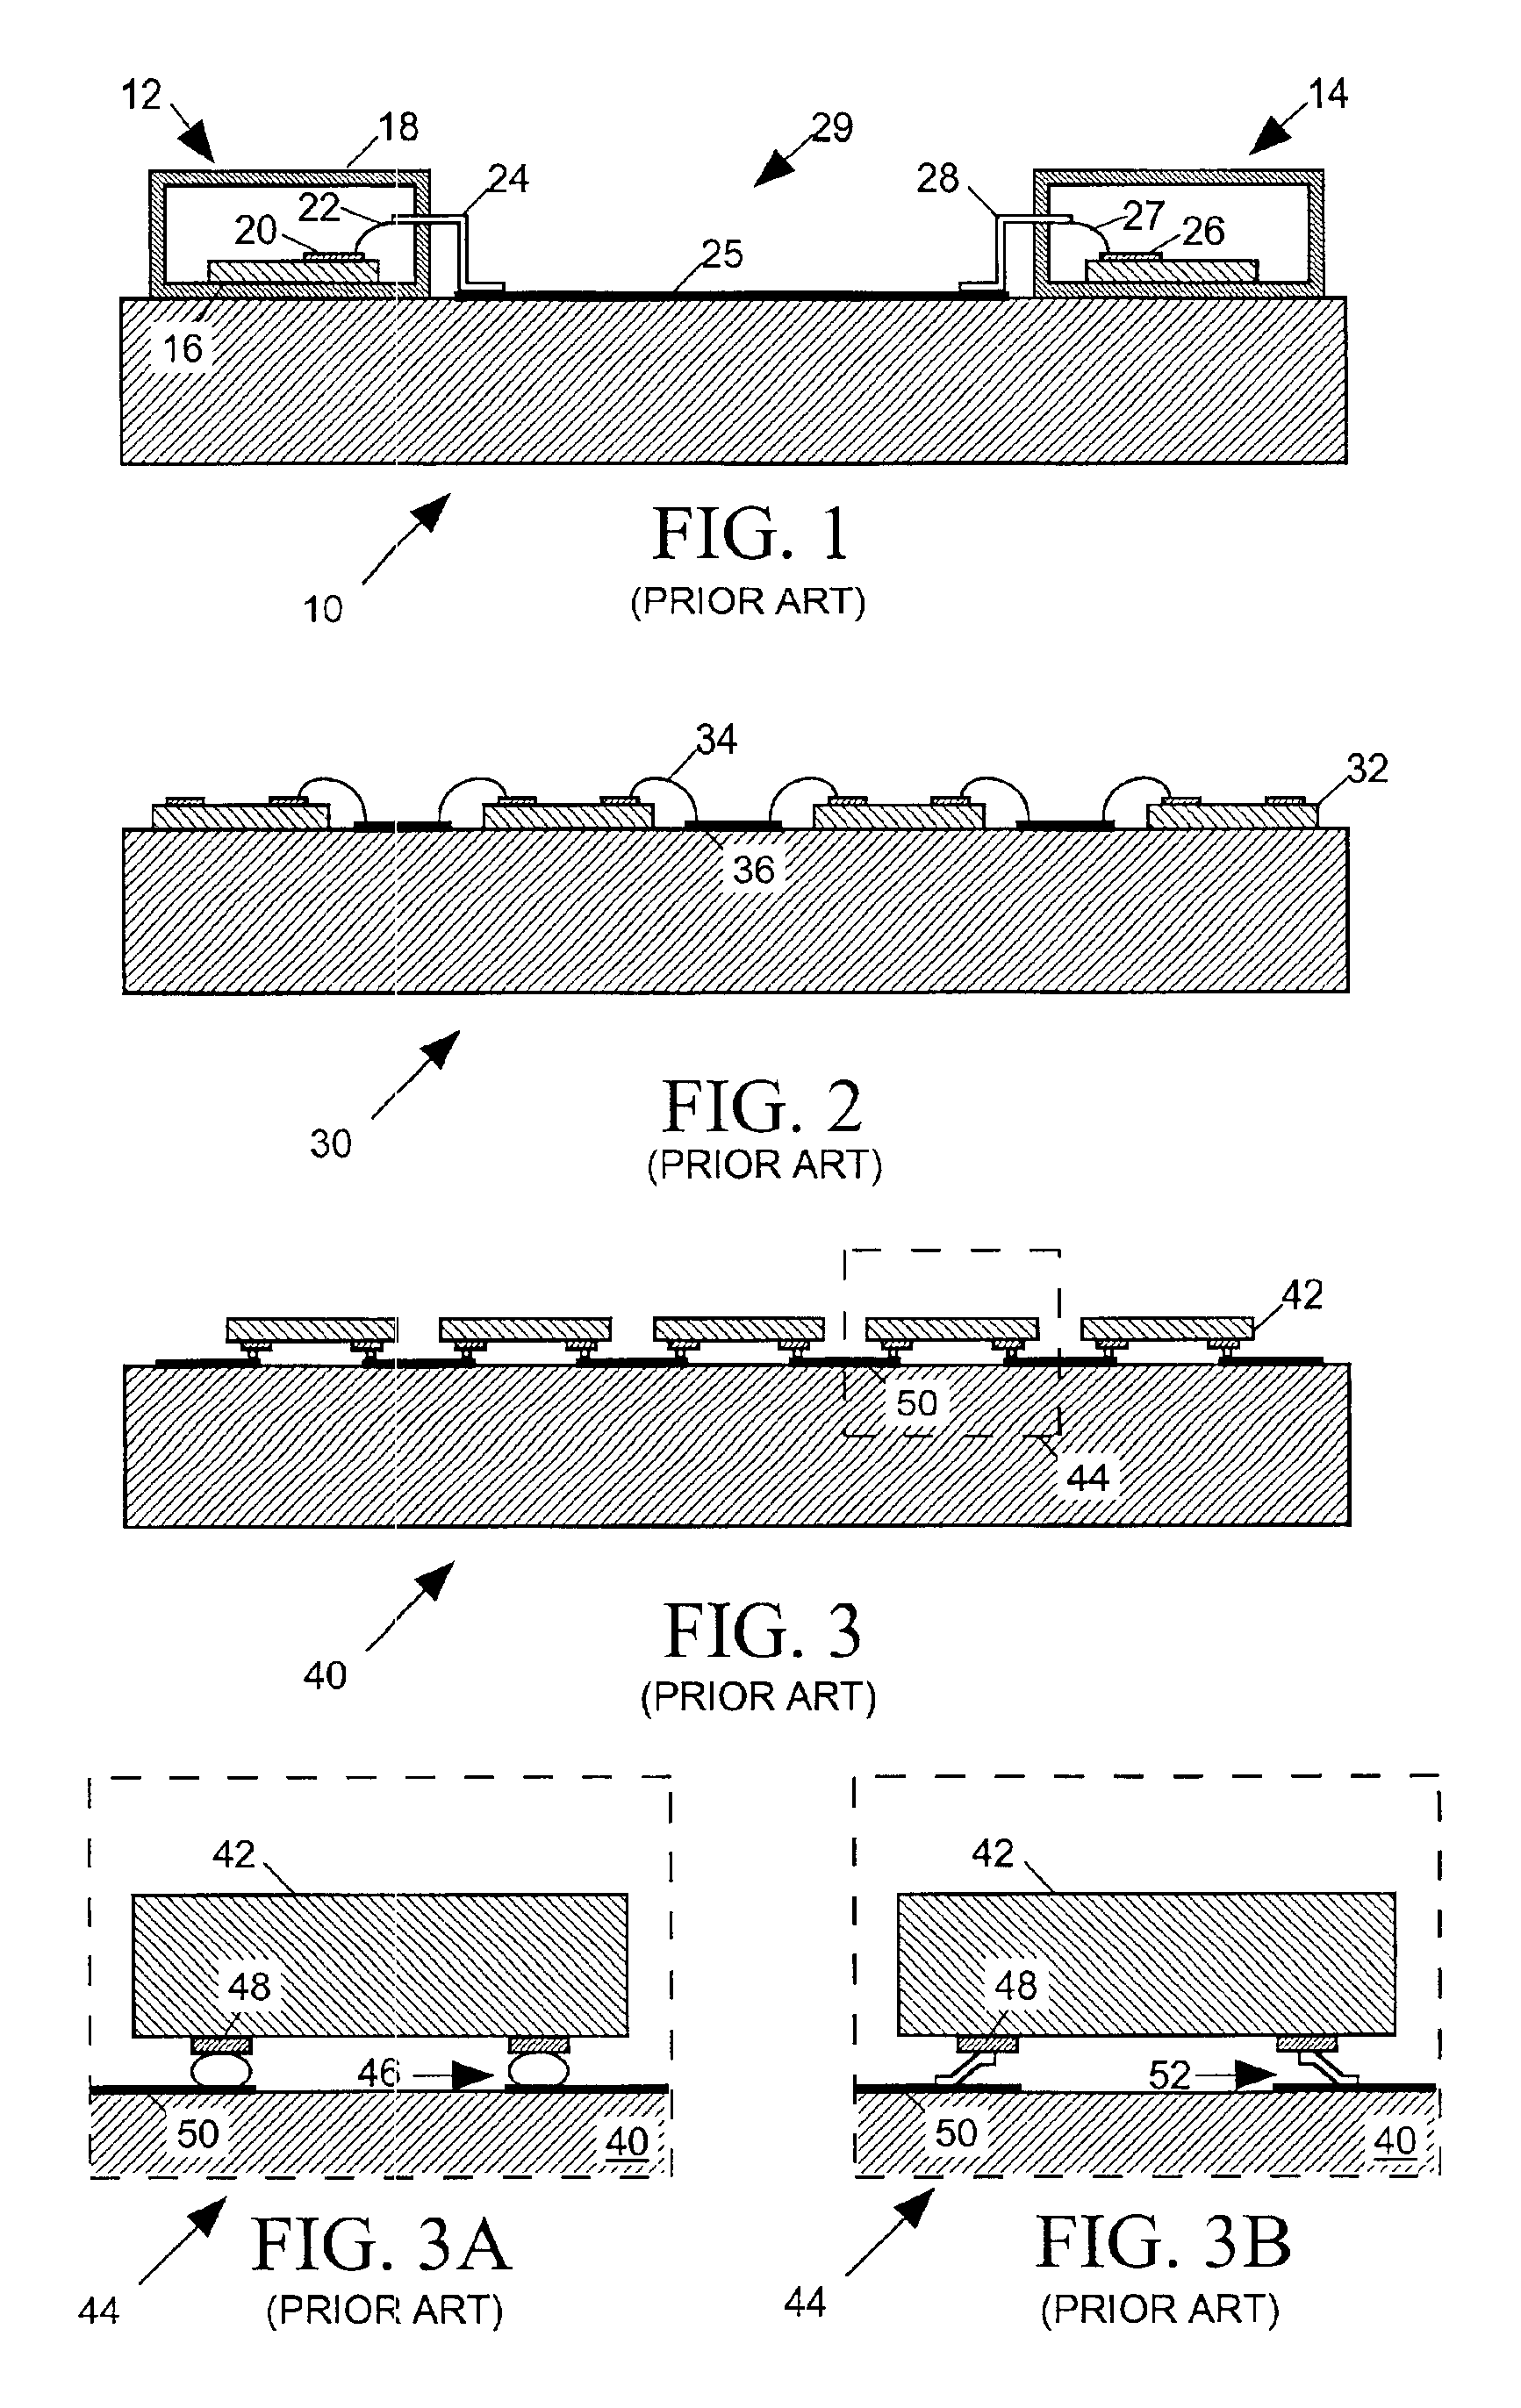 Method for fabricating an IC interconnect system including an in-street integrated circuit wafer via